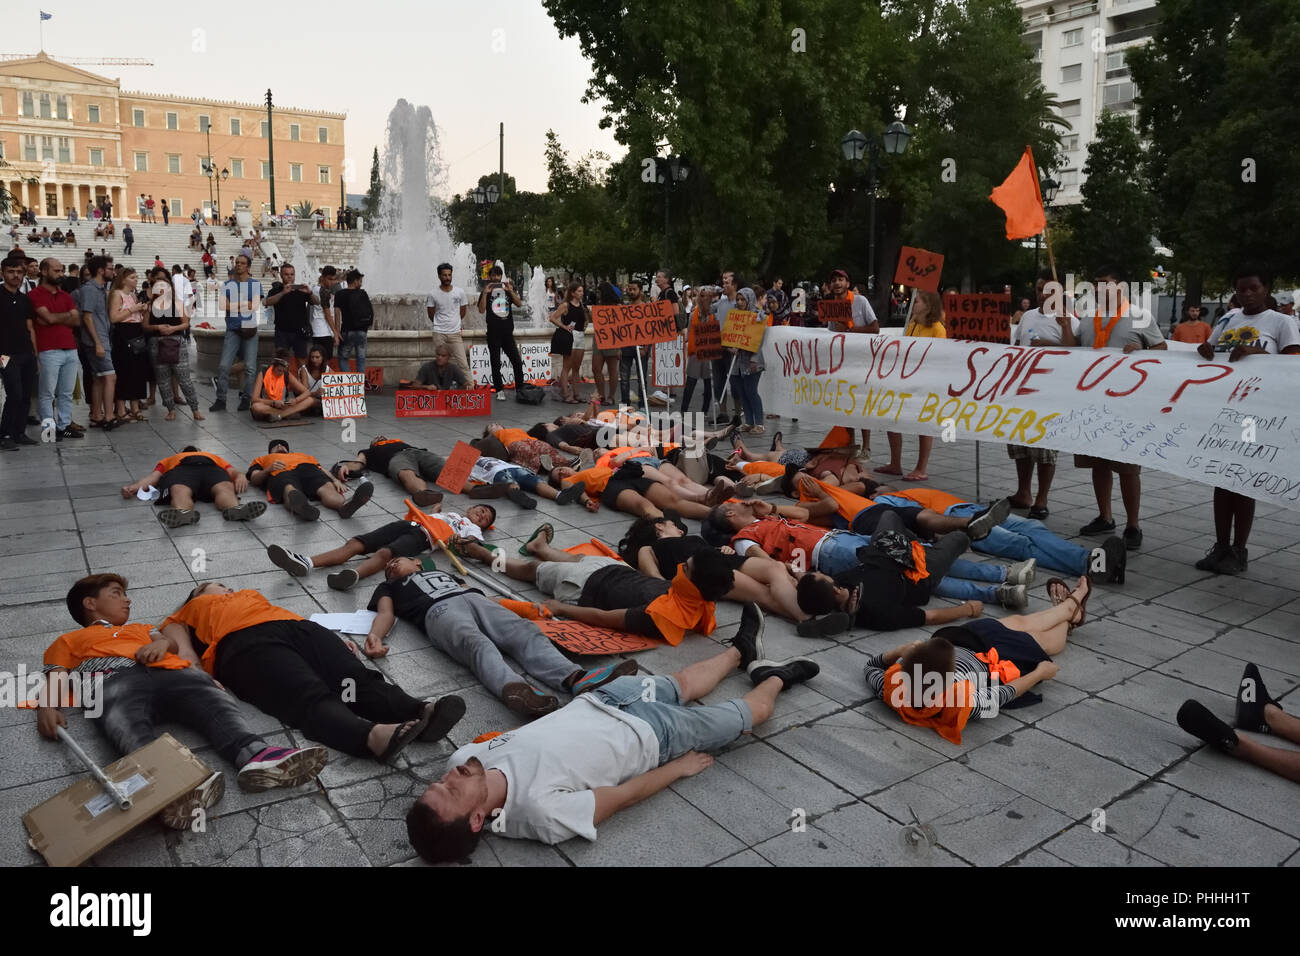 Athens, Greece. 1st Sept 2018. Protesters decry criminalization of refugee sea rescue operations in Athens, Greece. Credit: Nicolas Koutsokostas/Alamy Live News. Stock Photo